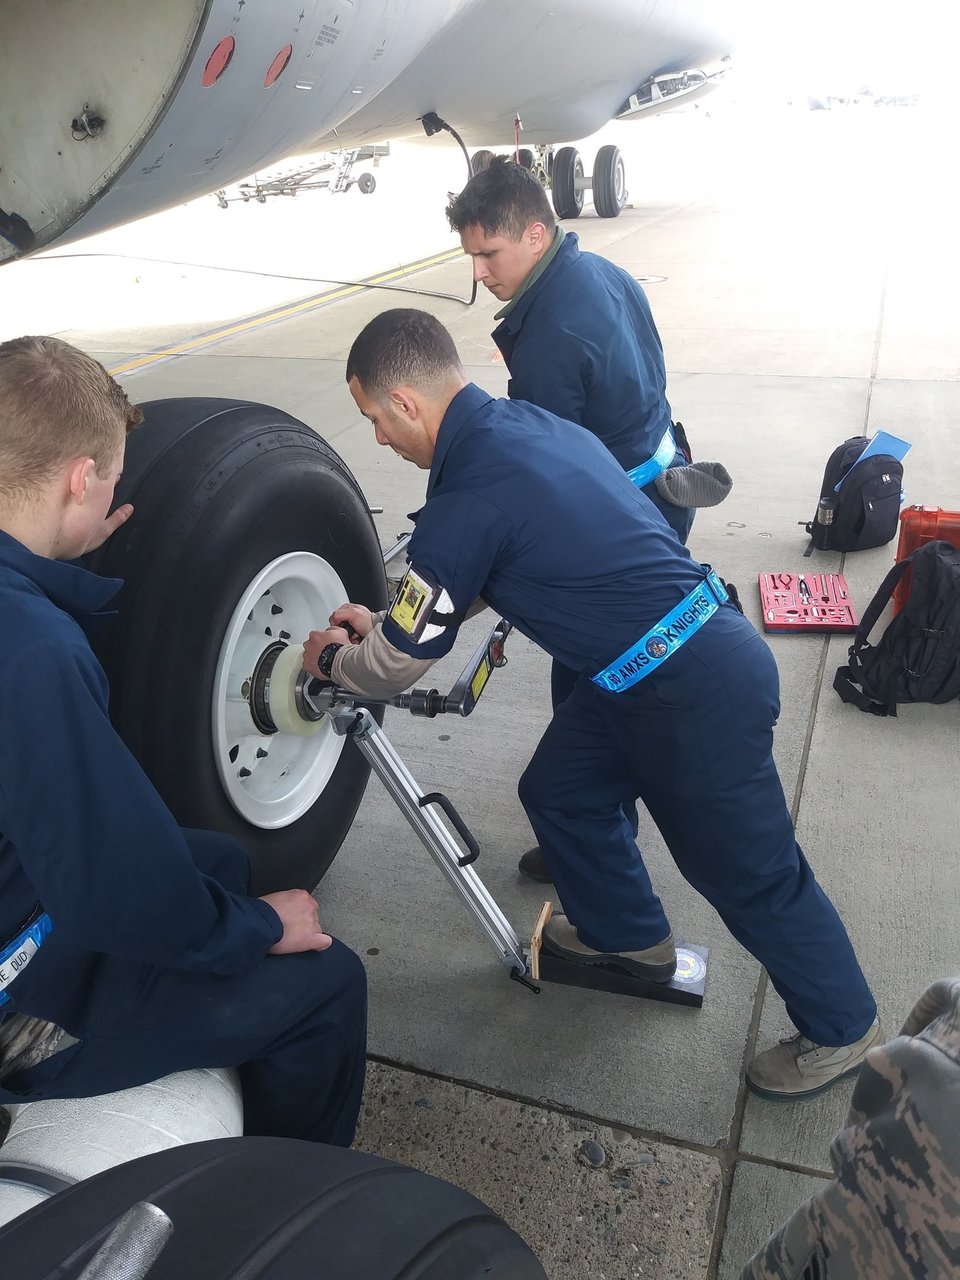 U.S. Air Force Invented A New Tool To Change The 28 Tires On C-5M Super Galaxy